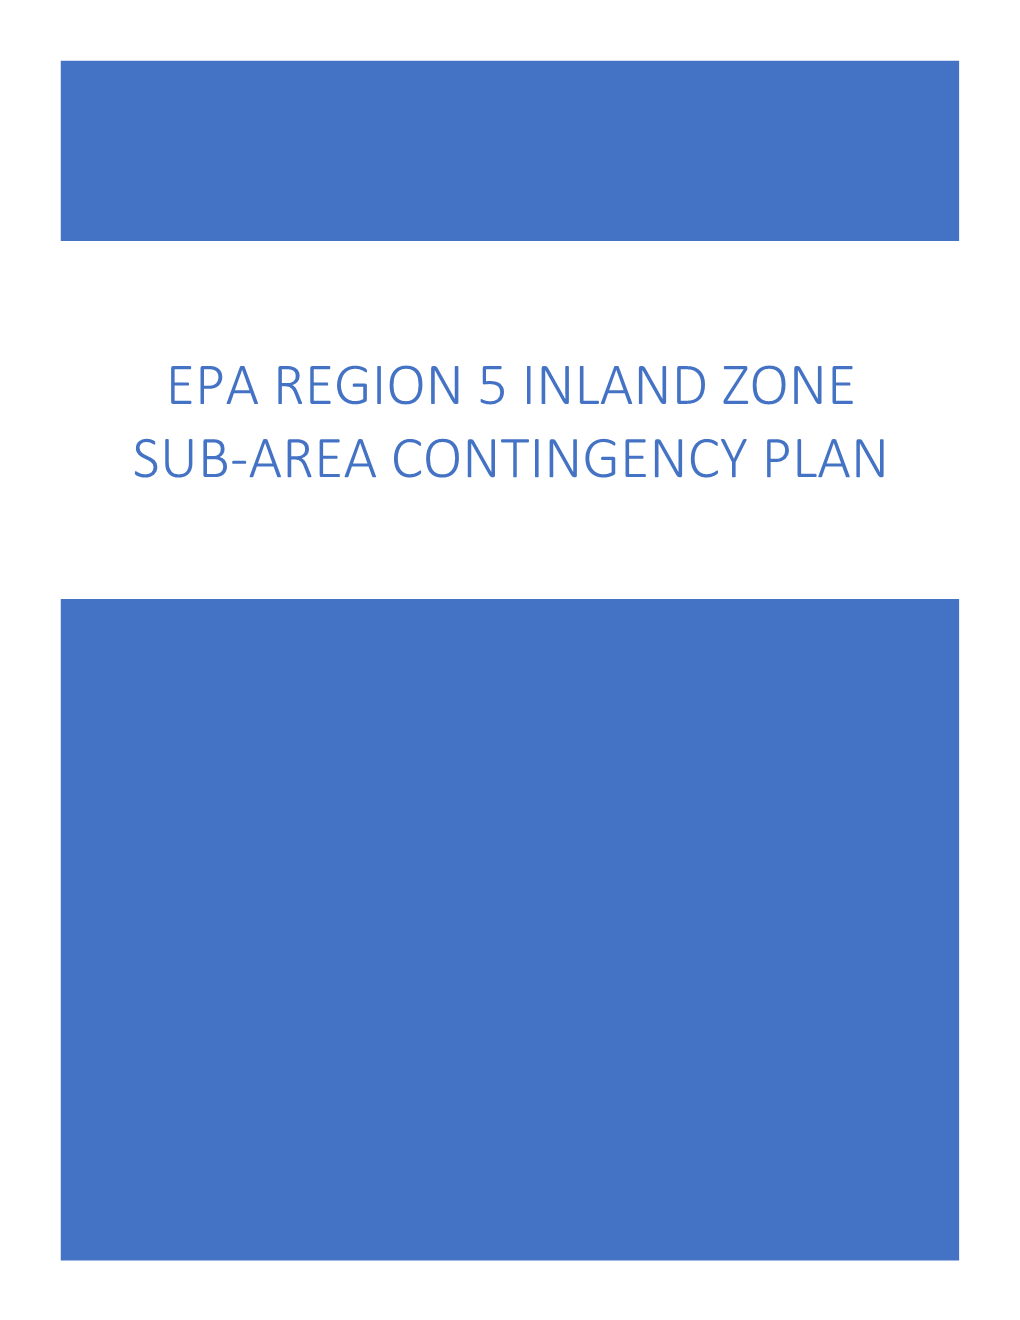 Inland Zone Sub-Area Contingency Plan (SACP) for Minneapolis/St